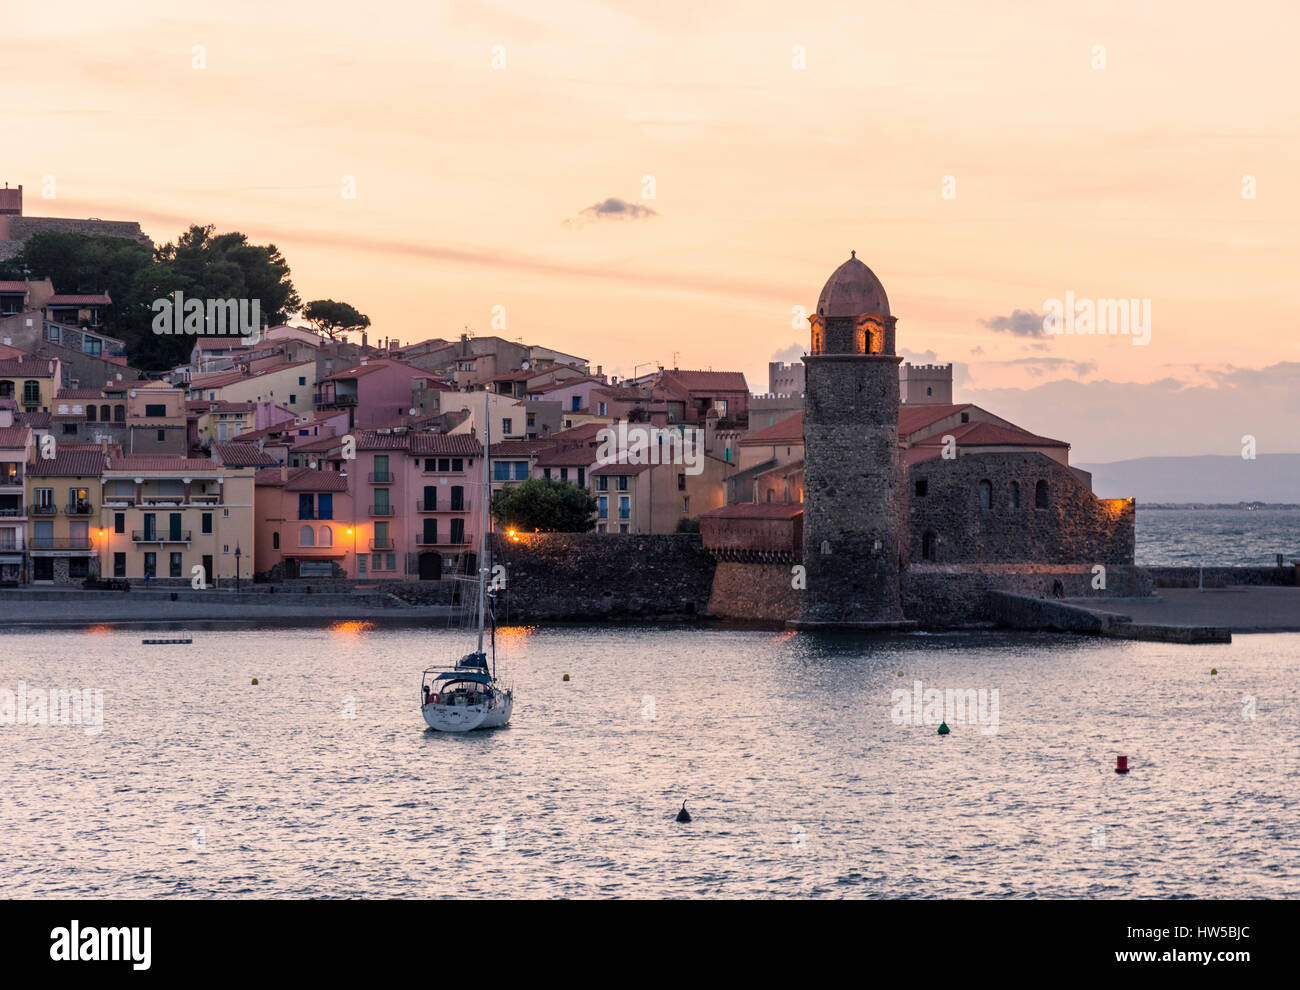 Collioure sunset over the bell tower and Church of Notre Dame des Anges, Collioure, Côte Vermeille, France Stock Photo